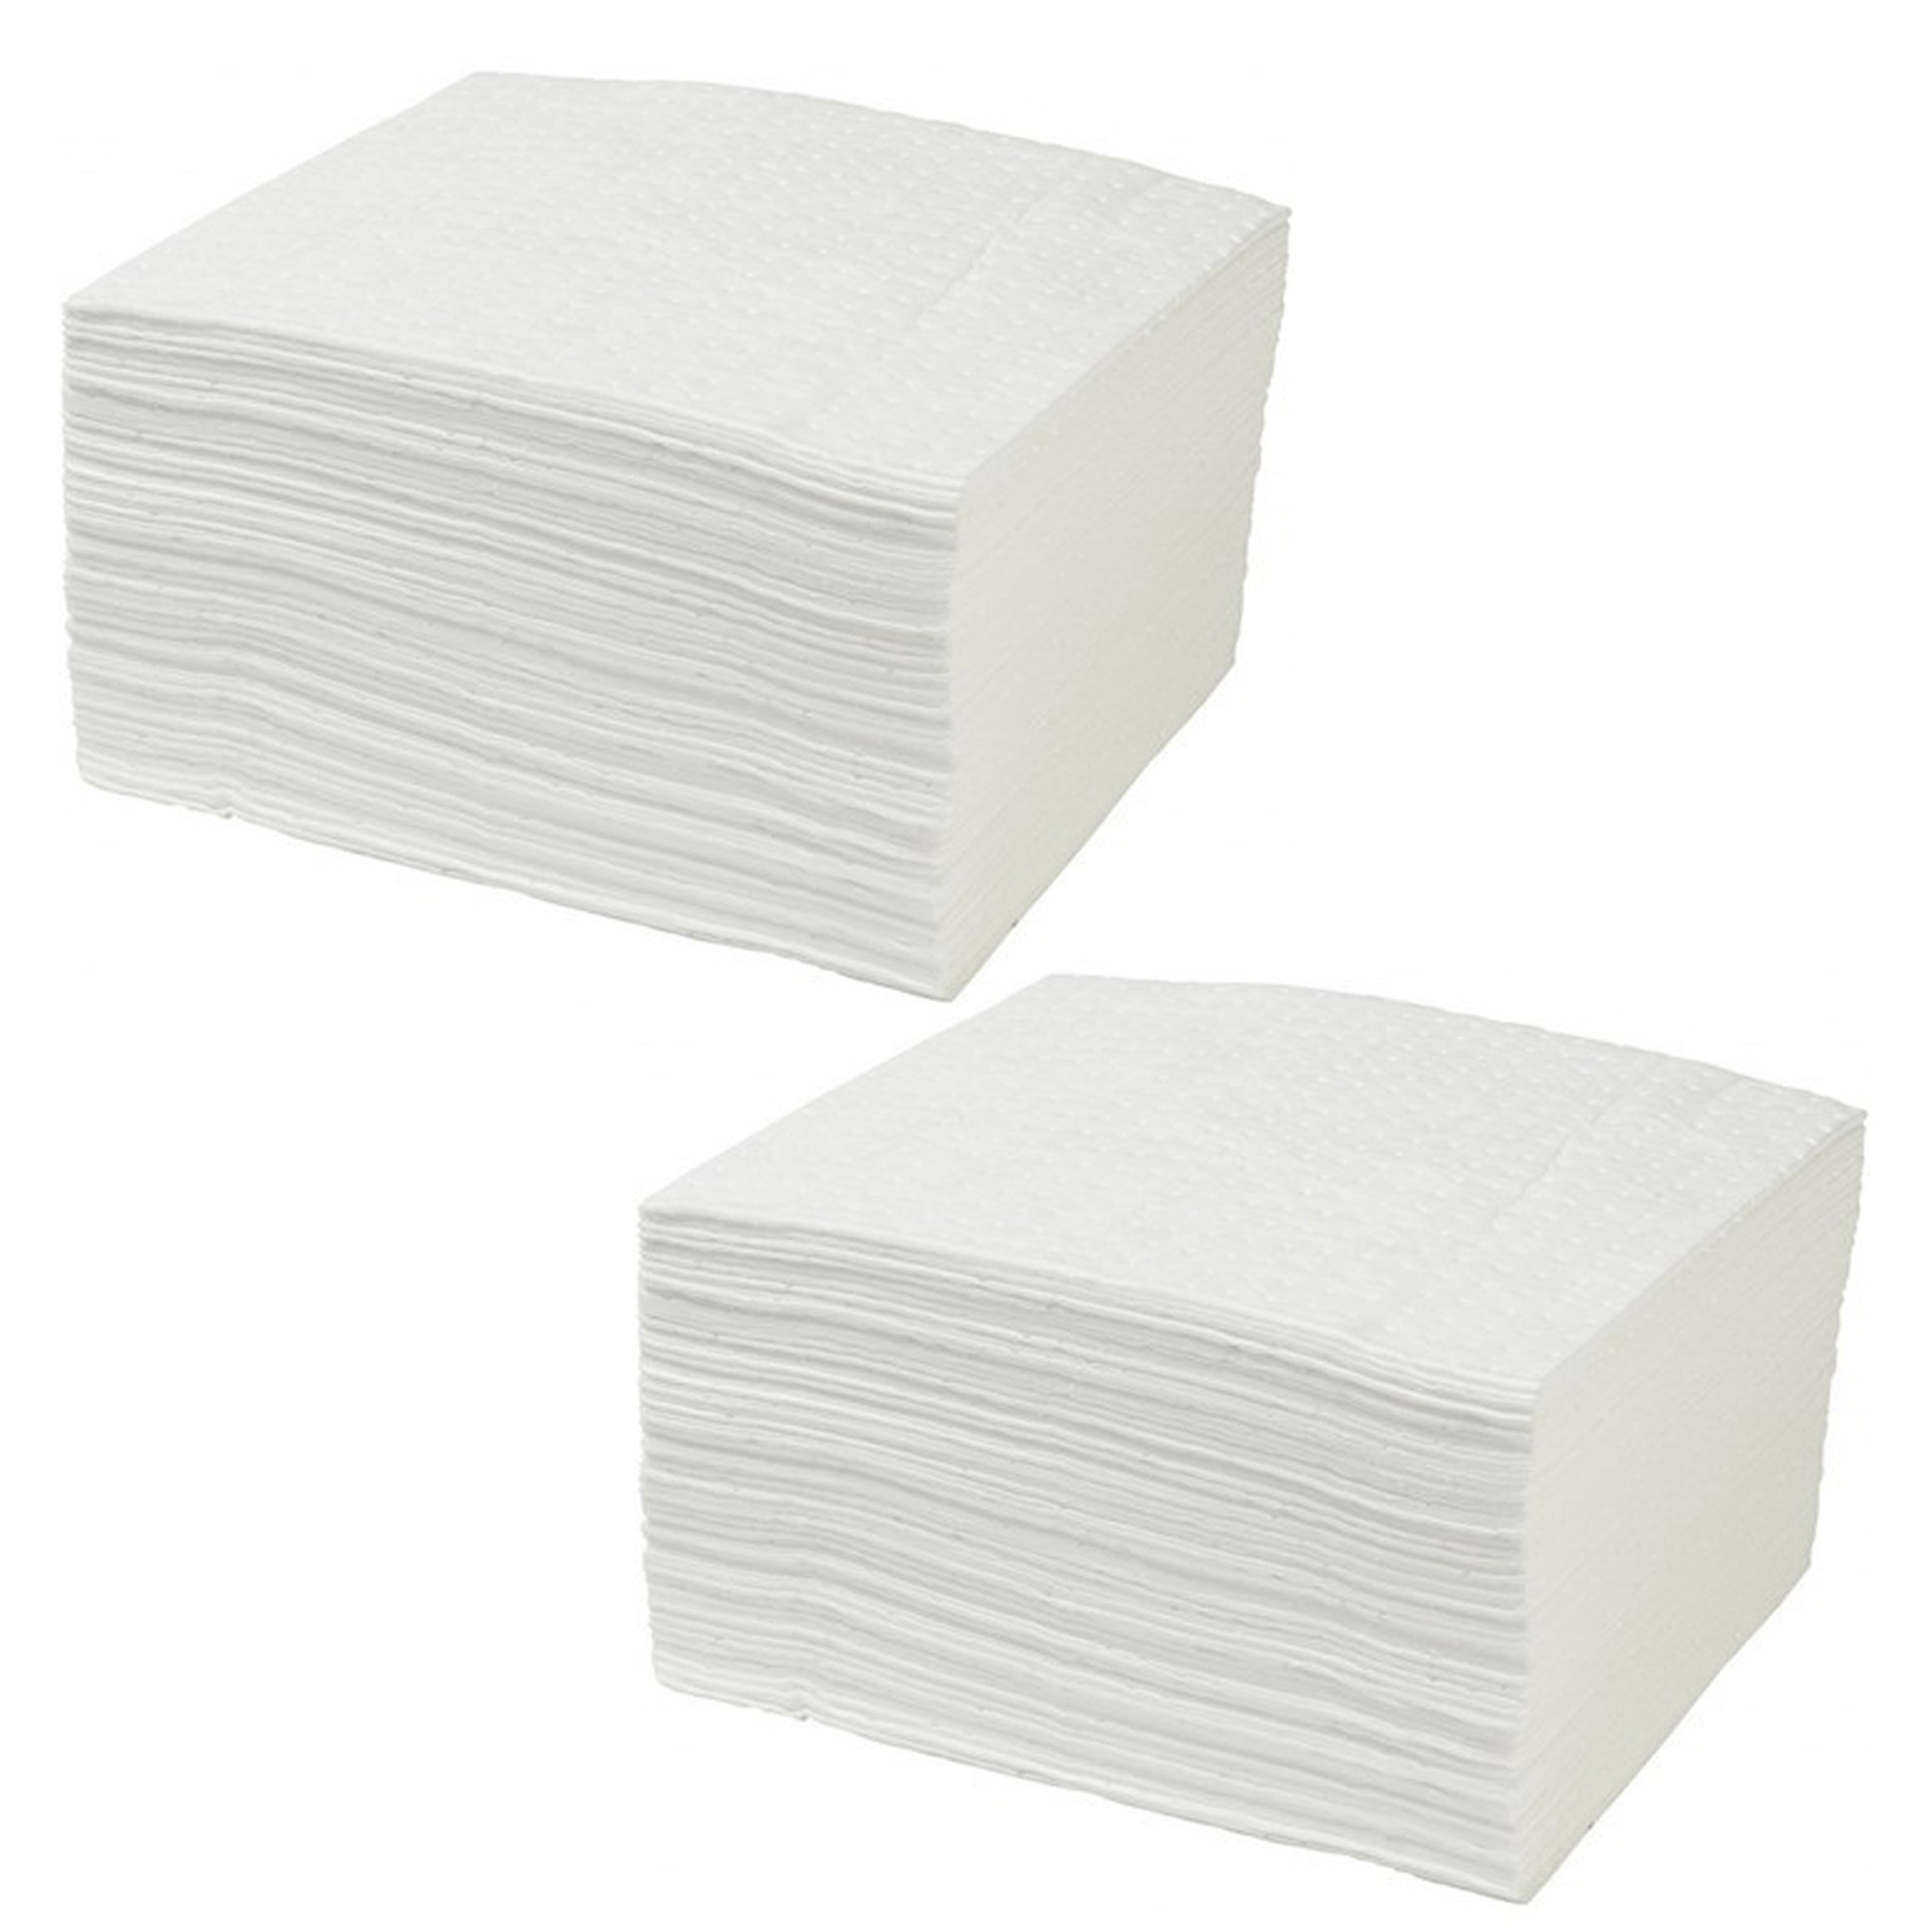 New Pig Hurricane Wringable and Reusable Water Absorbing Mats - Pack of 20, 15-in x 19-in Absorbent Pads for Basements and Garages | PML20008